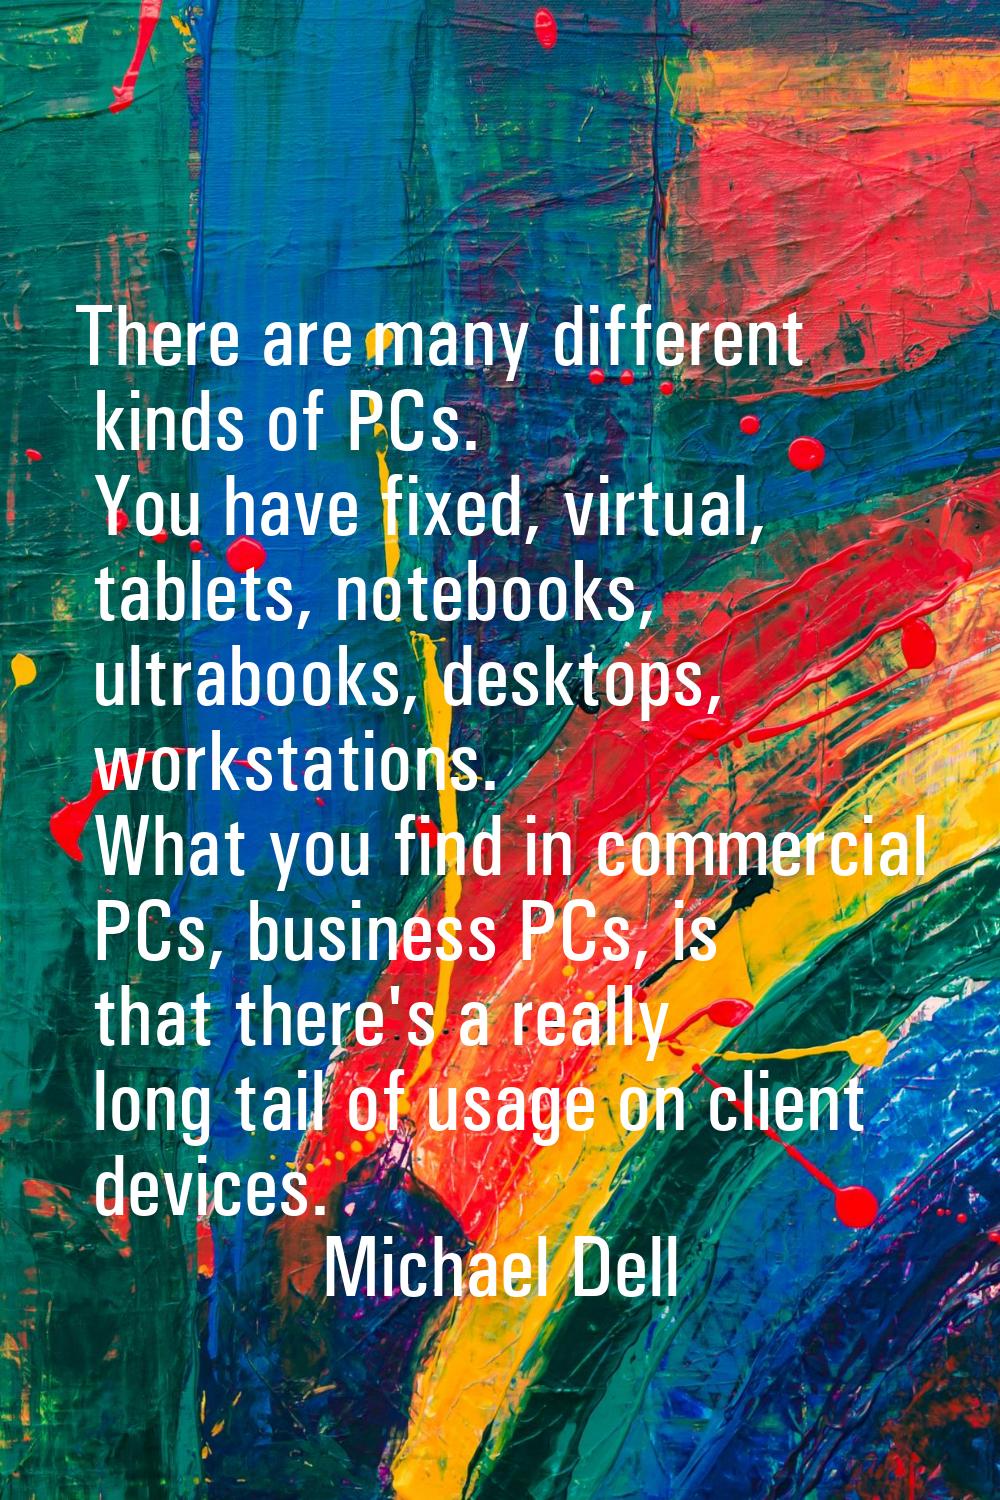 There are many different kinds of PCs. You have fixed, virtual, tablets, notebooks, ultrabooks, des